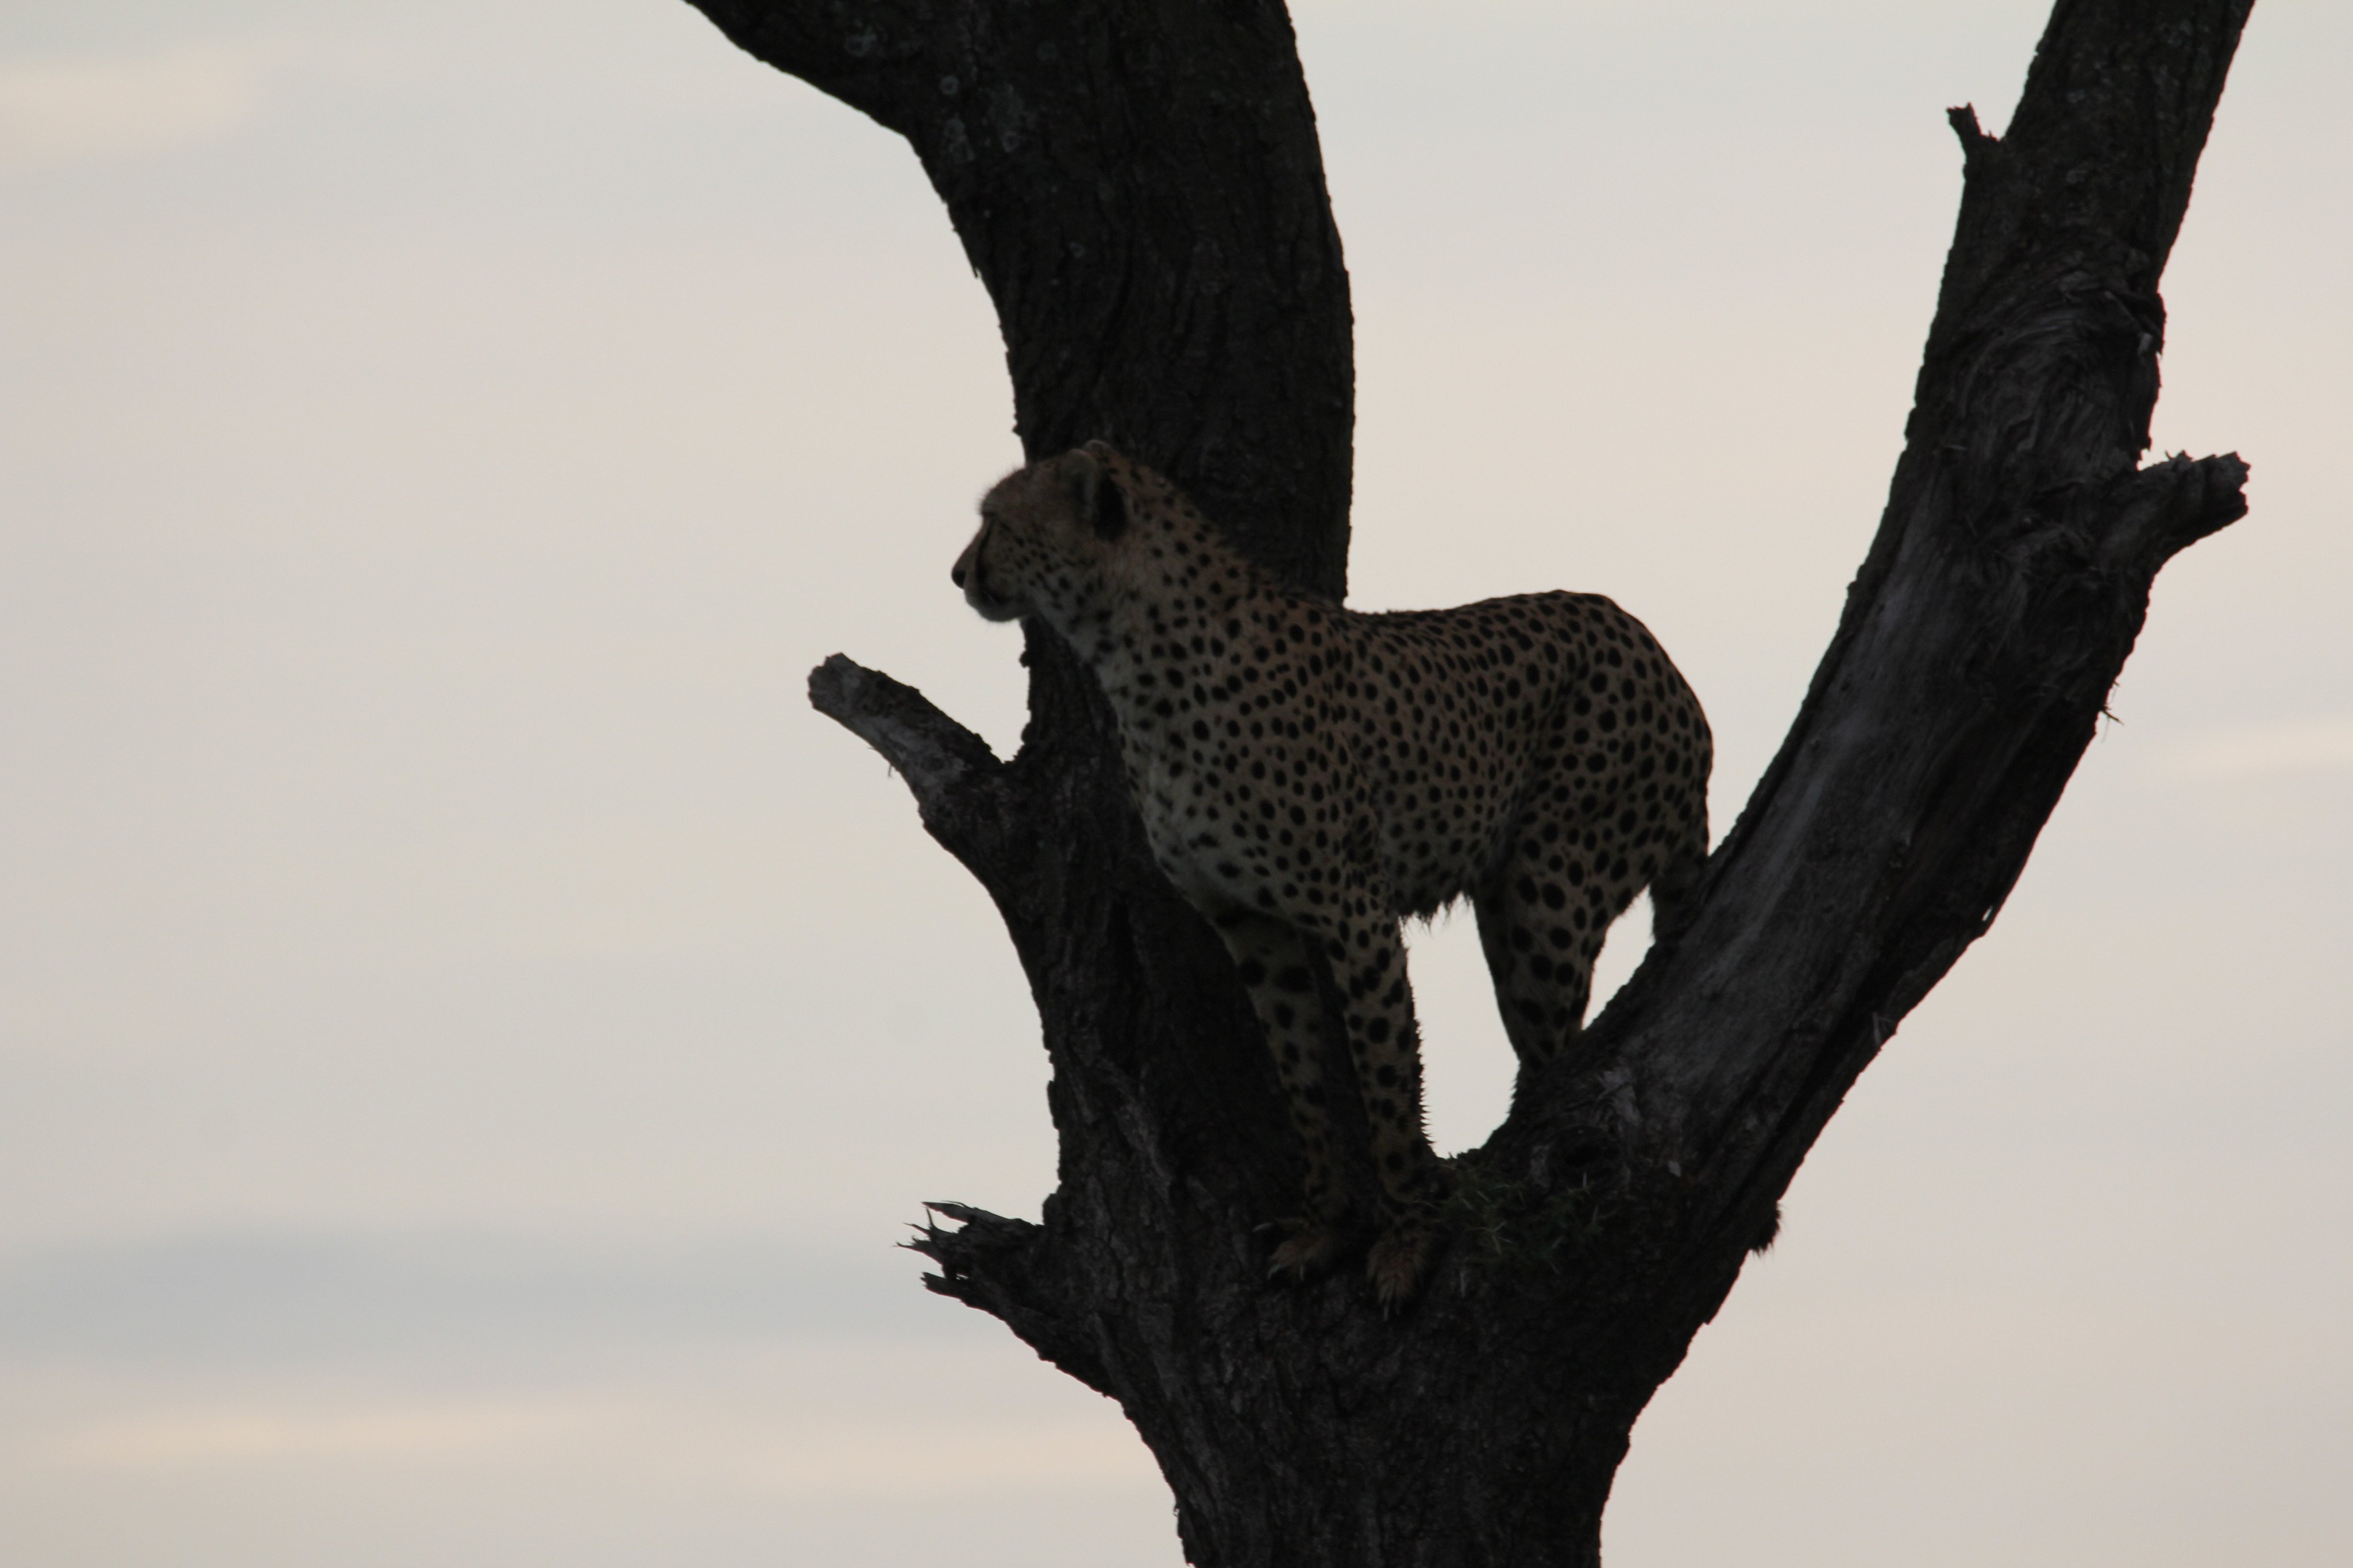 Cheetahs in trees: A photographic essay on grace and style / Twitter